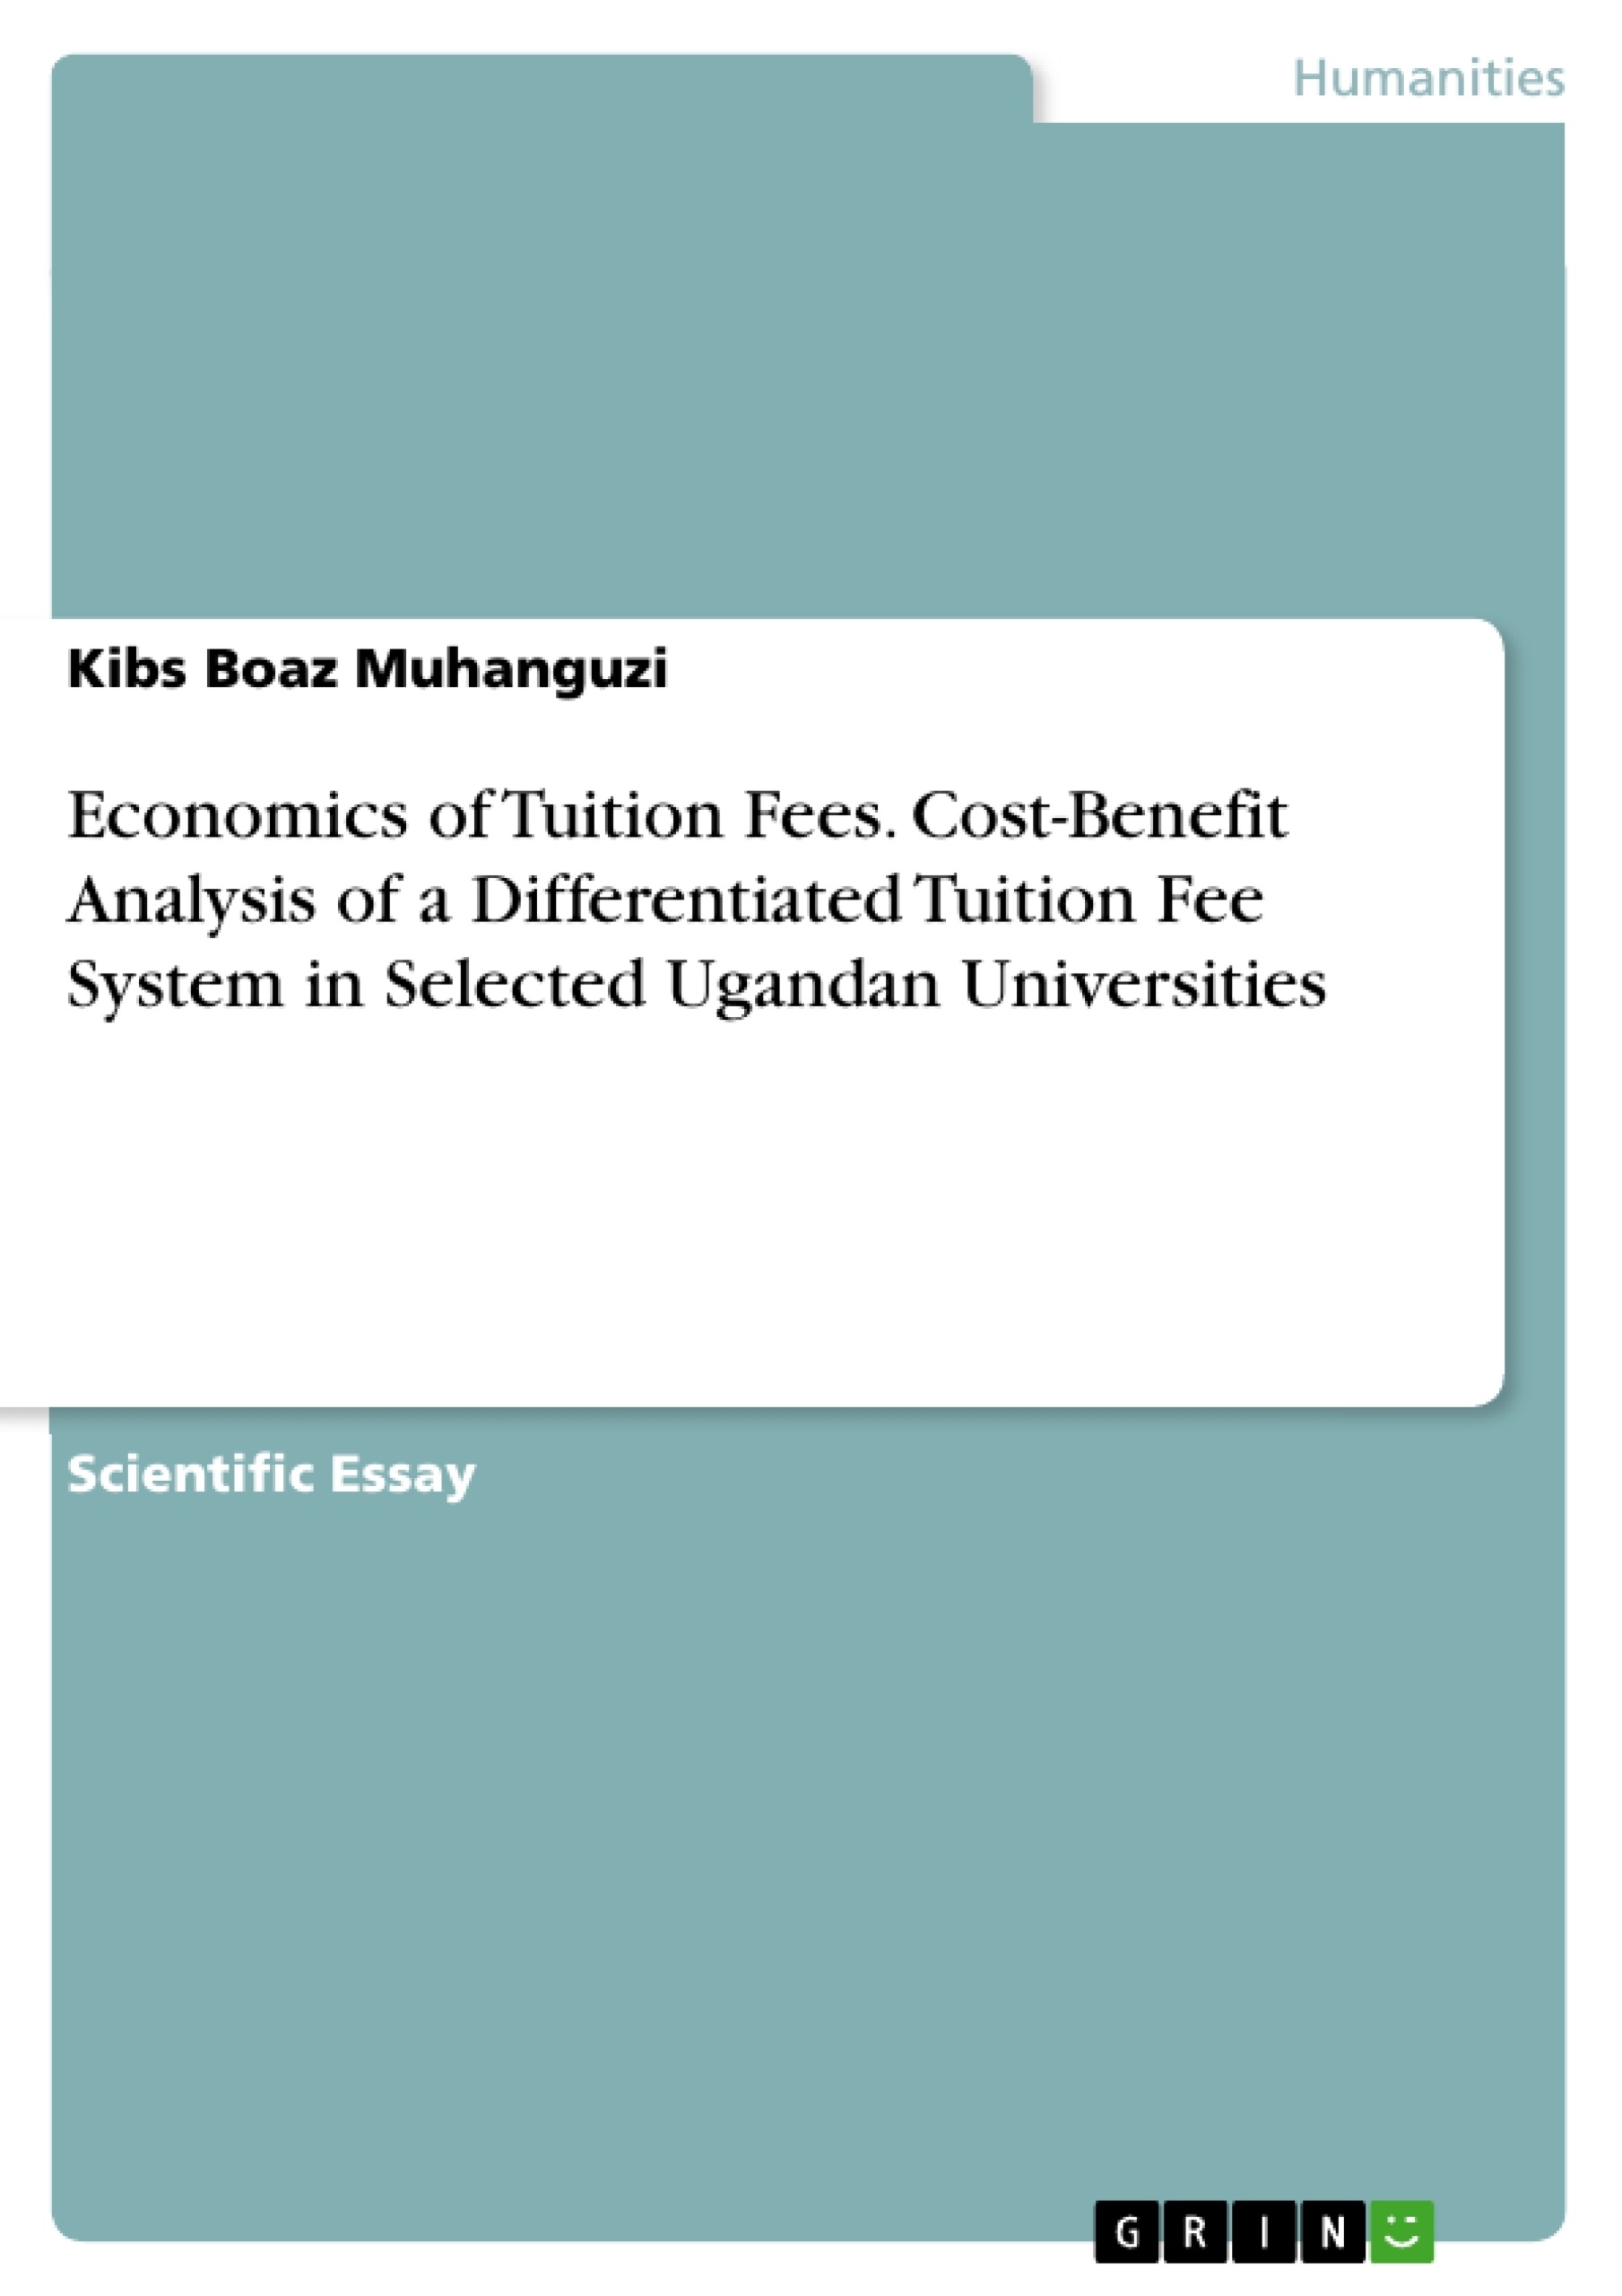 Titre: Economics of Tuition Fees. Cost-Benefit Analysis of a Differentiated Tuition Fee System in Selected Ugandan Universities